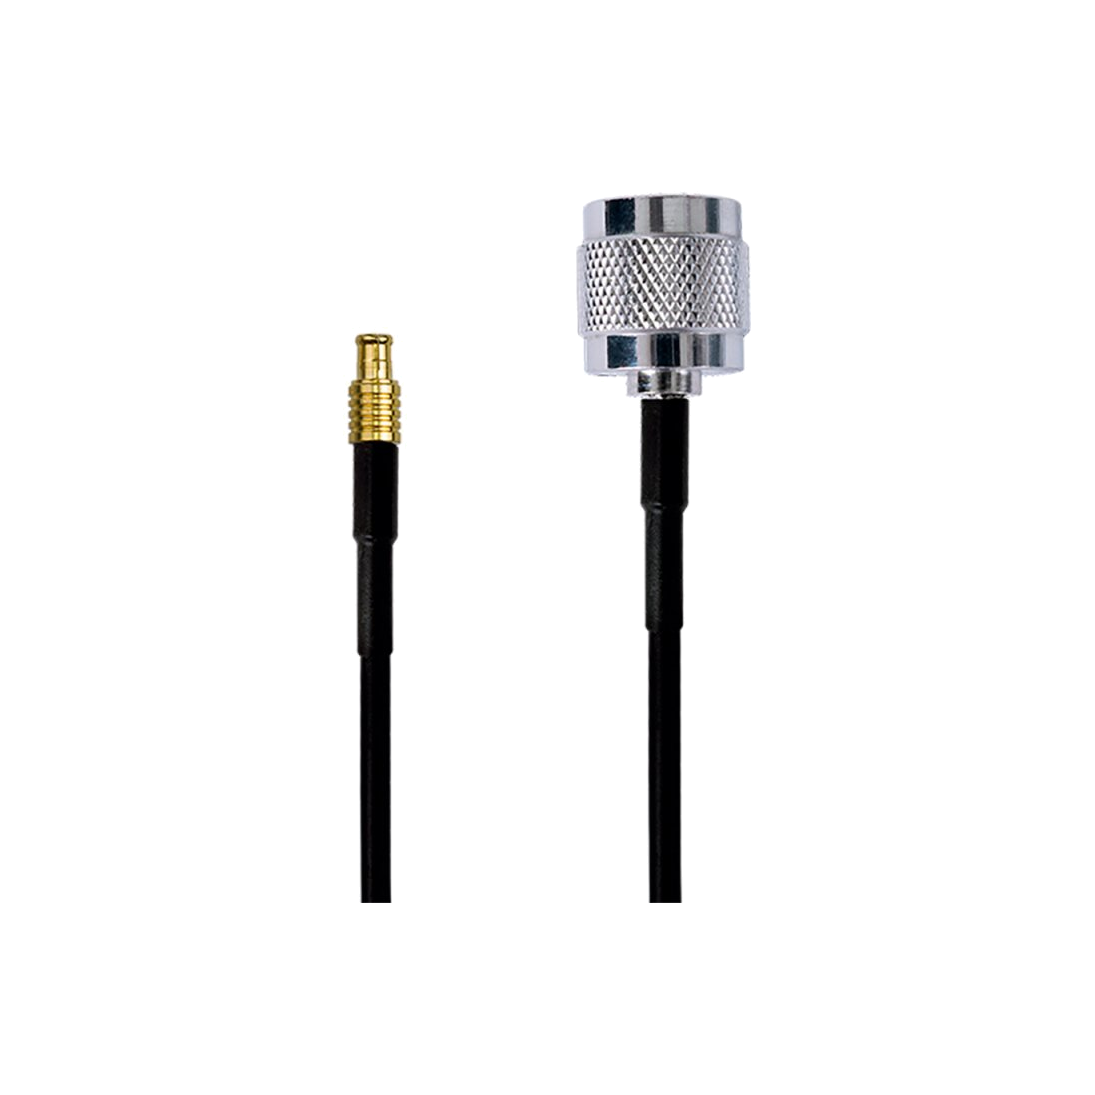 Emlid Reach M/M+ - TNC Antenna Adapter Cable (2 m)